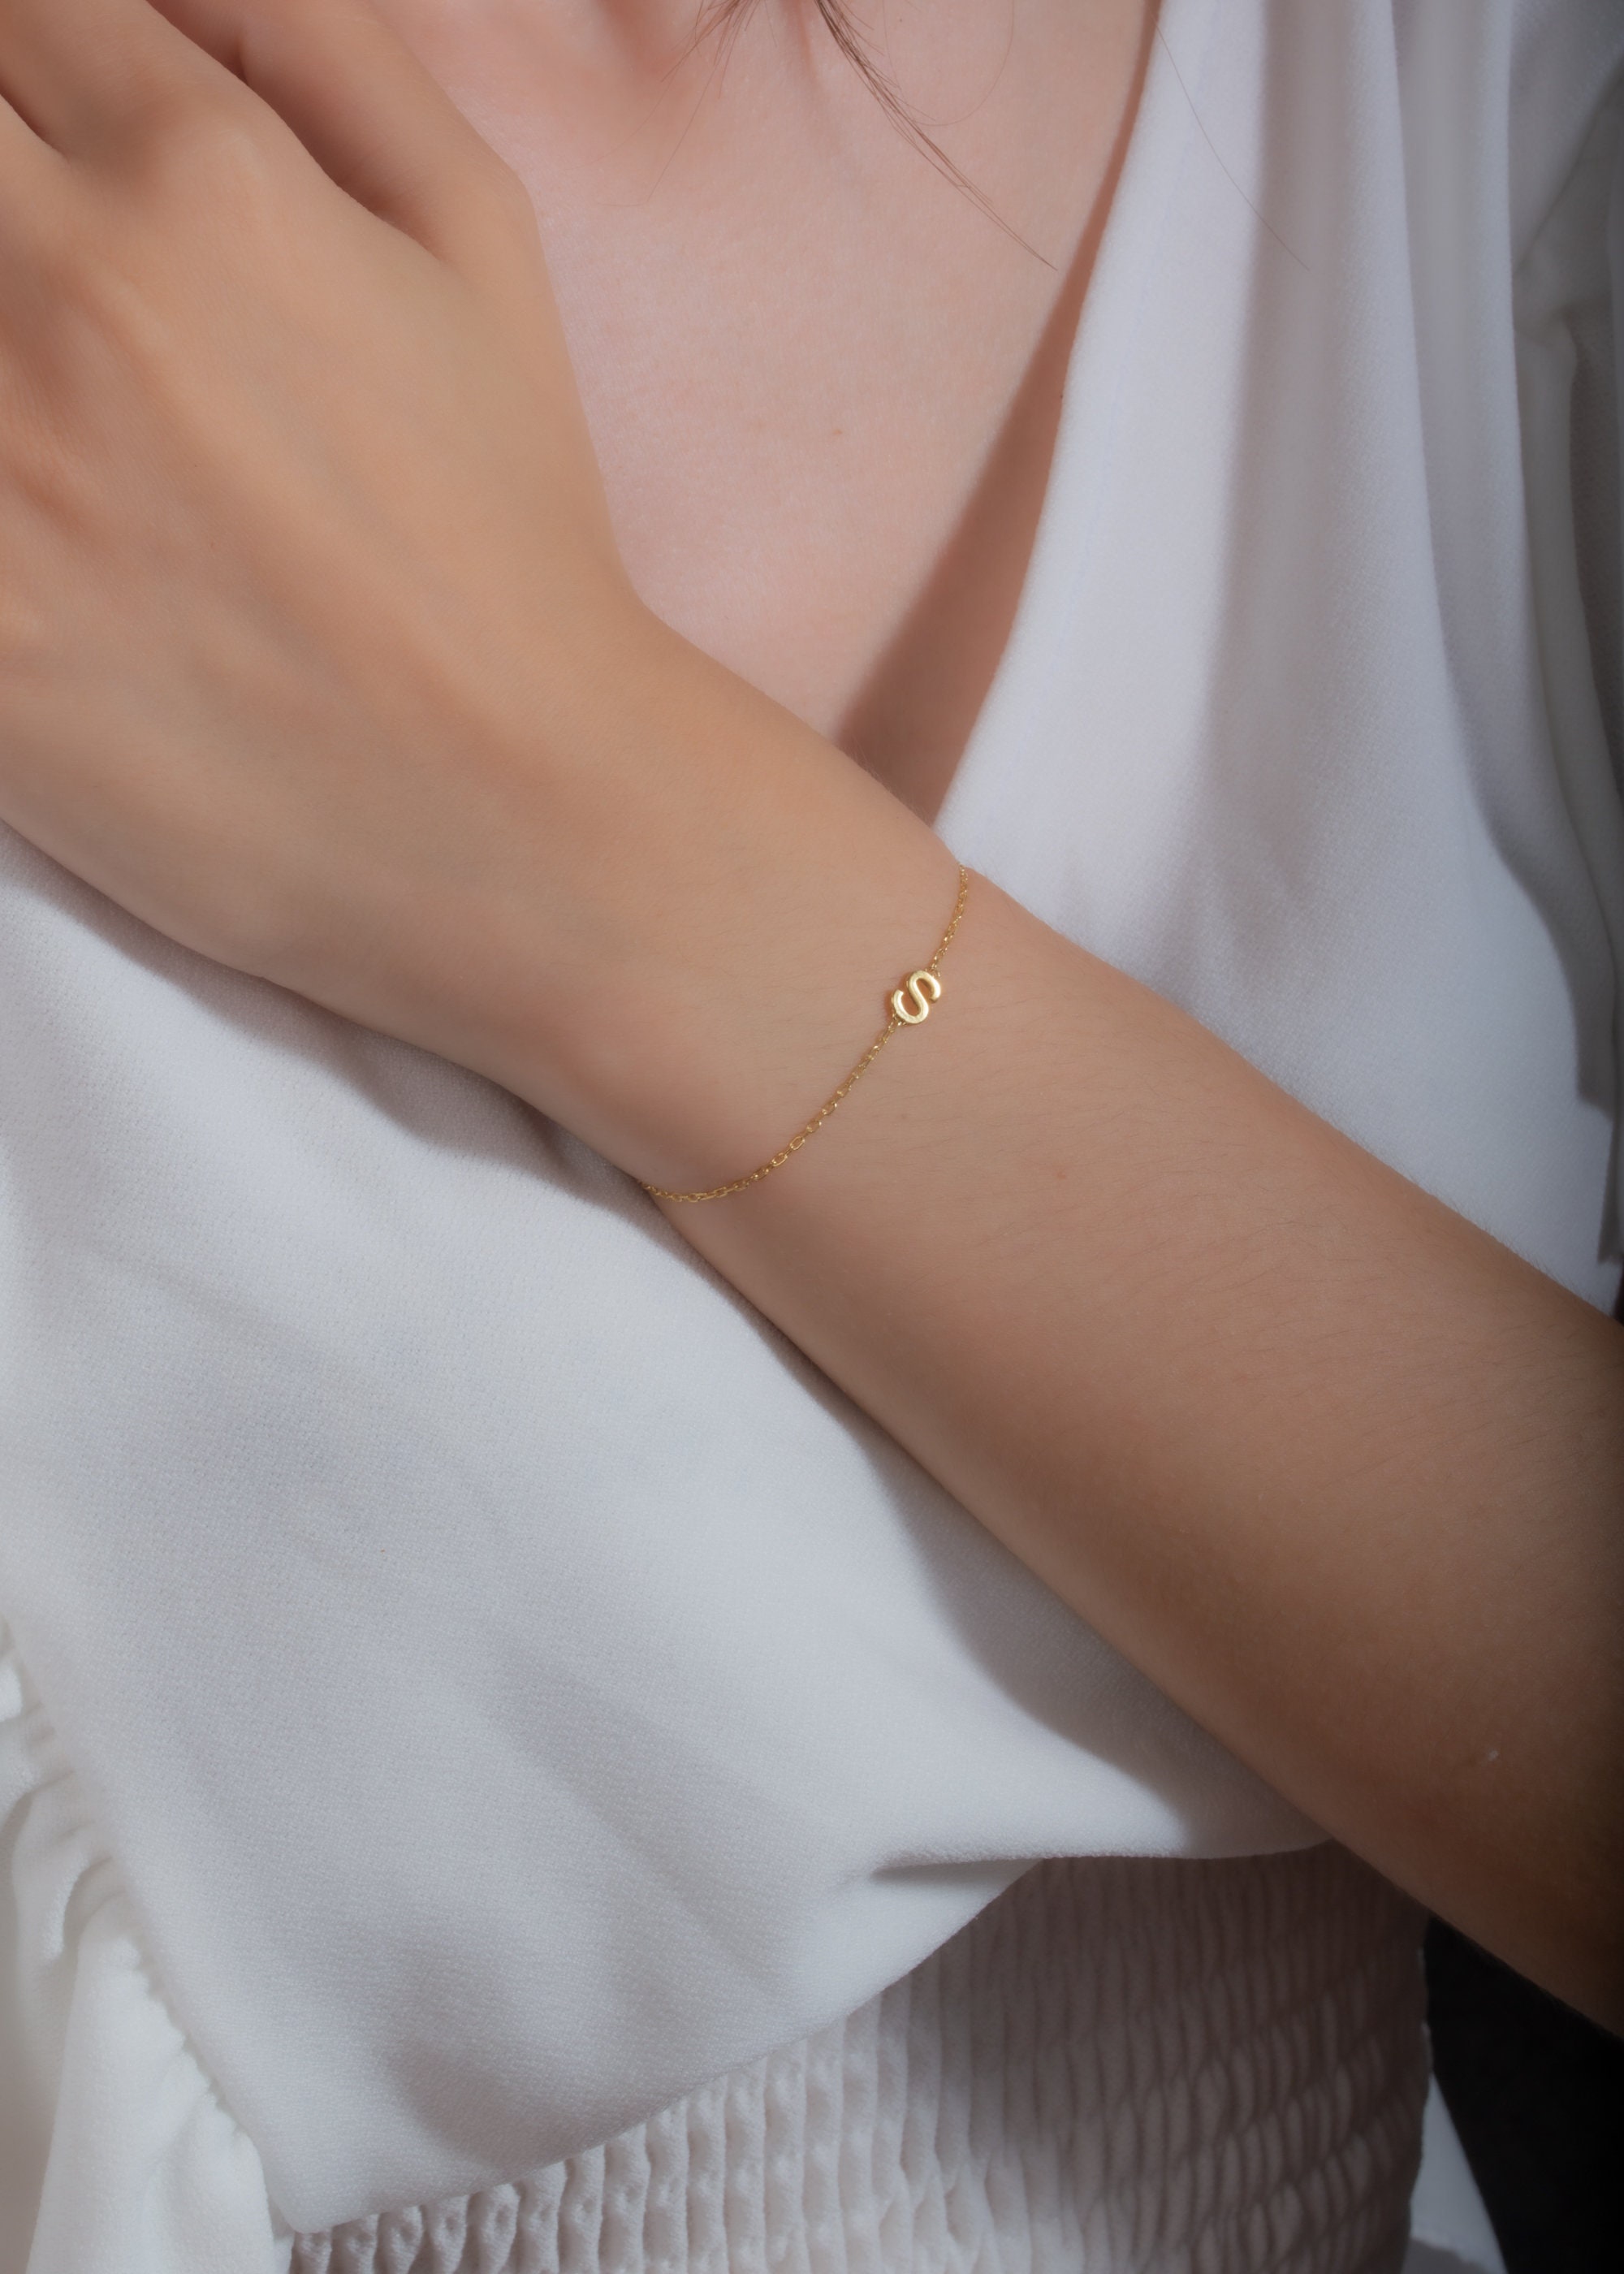 18ct Yellow Gold Love Letter Initial Bracelet